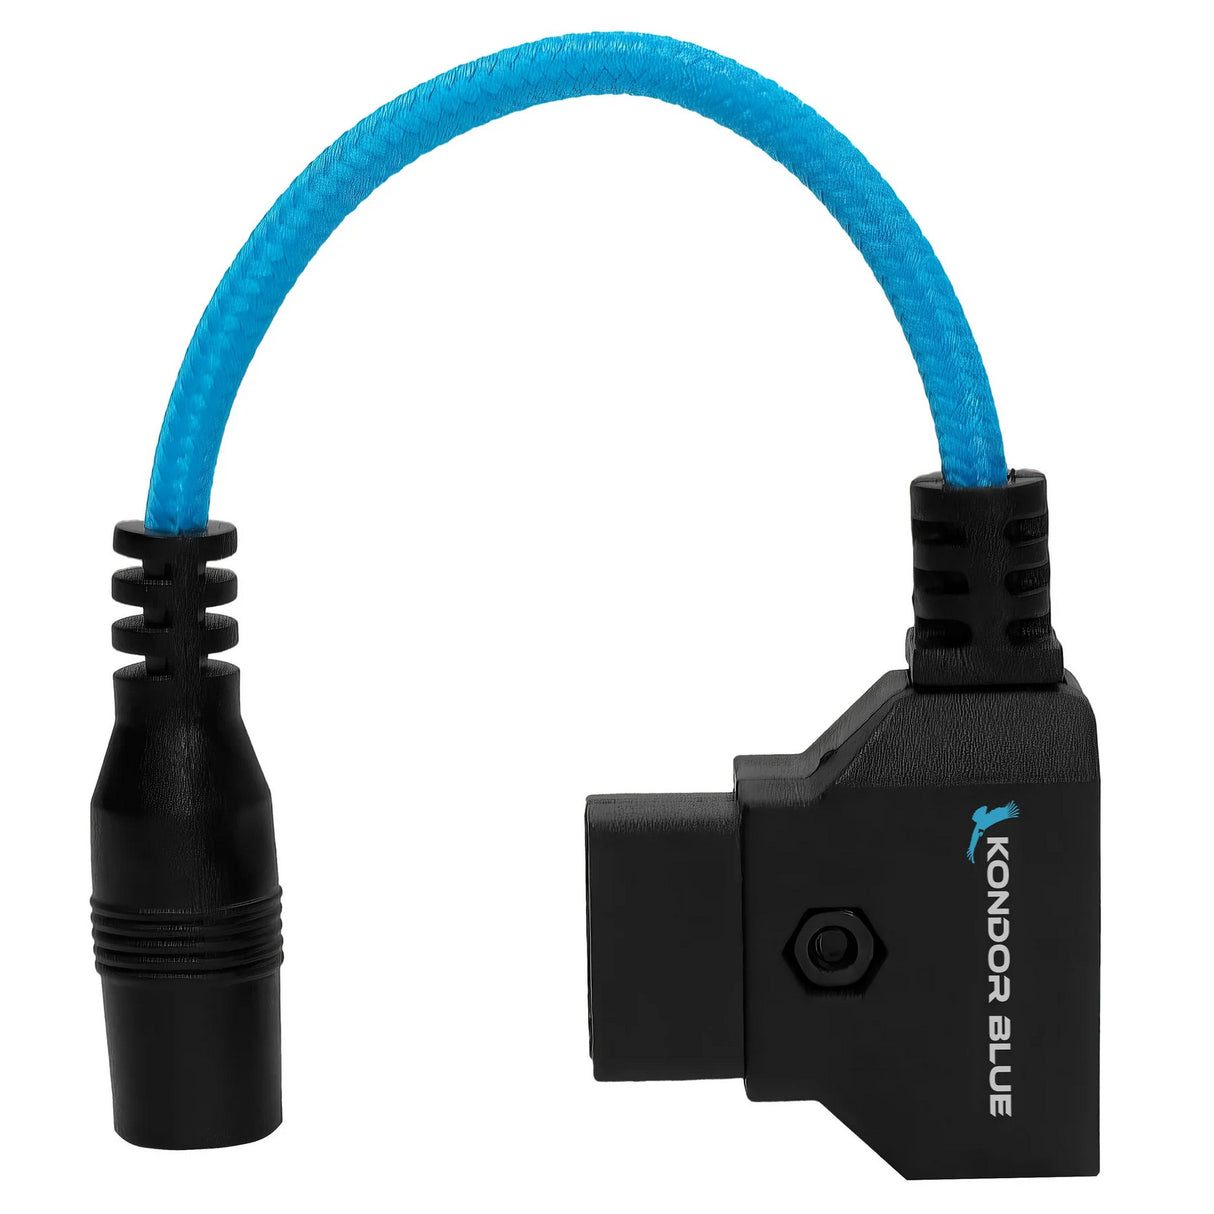 Kondor Blue 6" D-Tap to DC 2.1 Female Adapter Cable